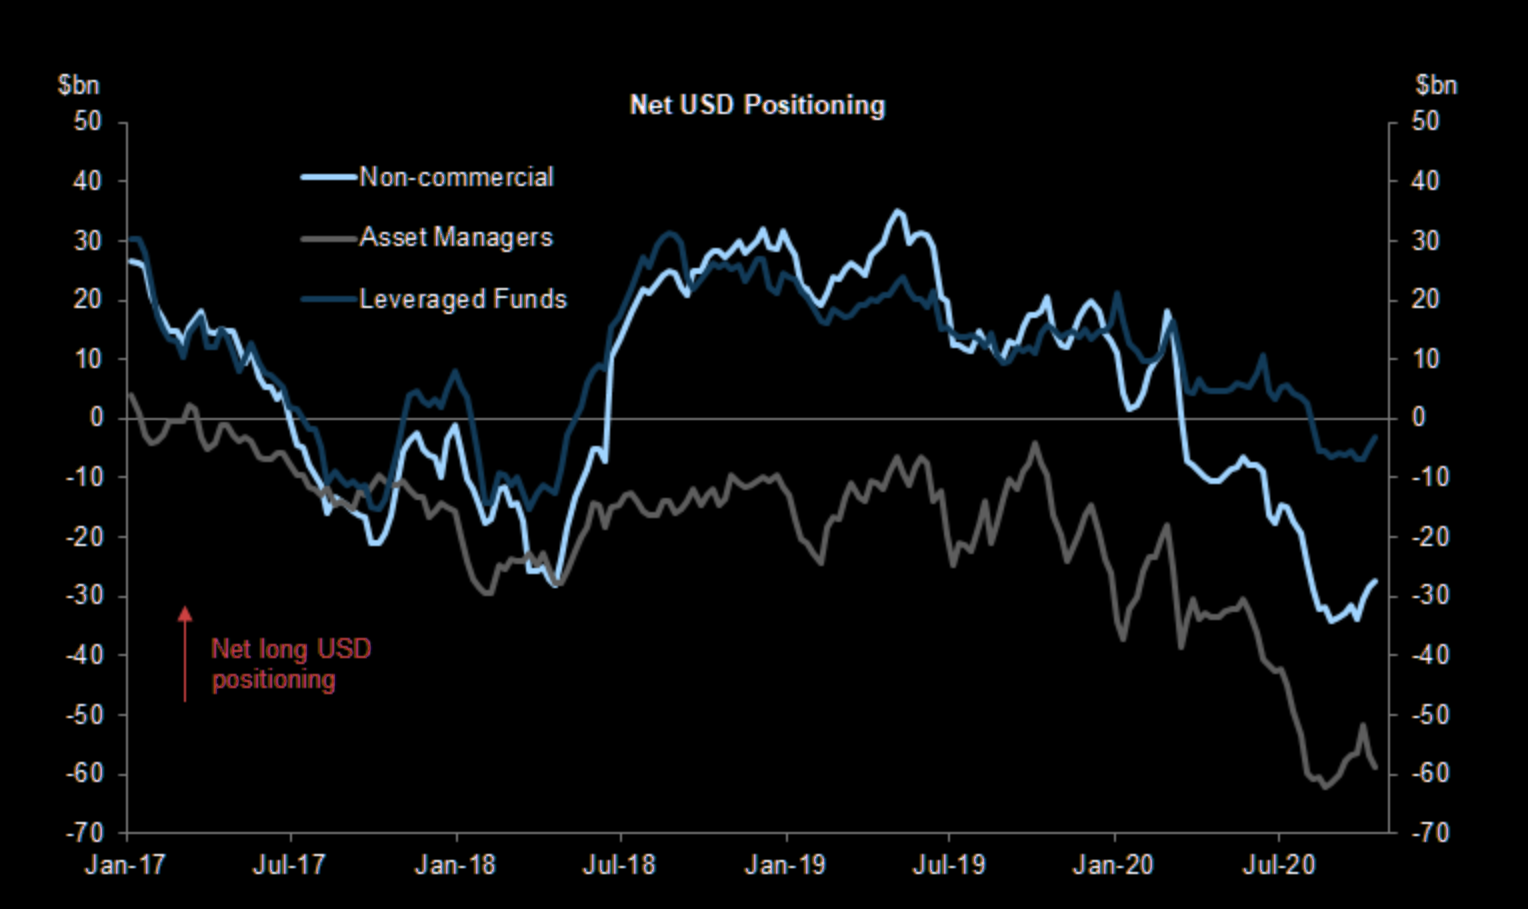 Net short USD positioning starting to be reduced 